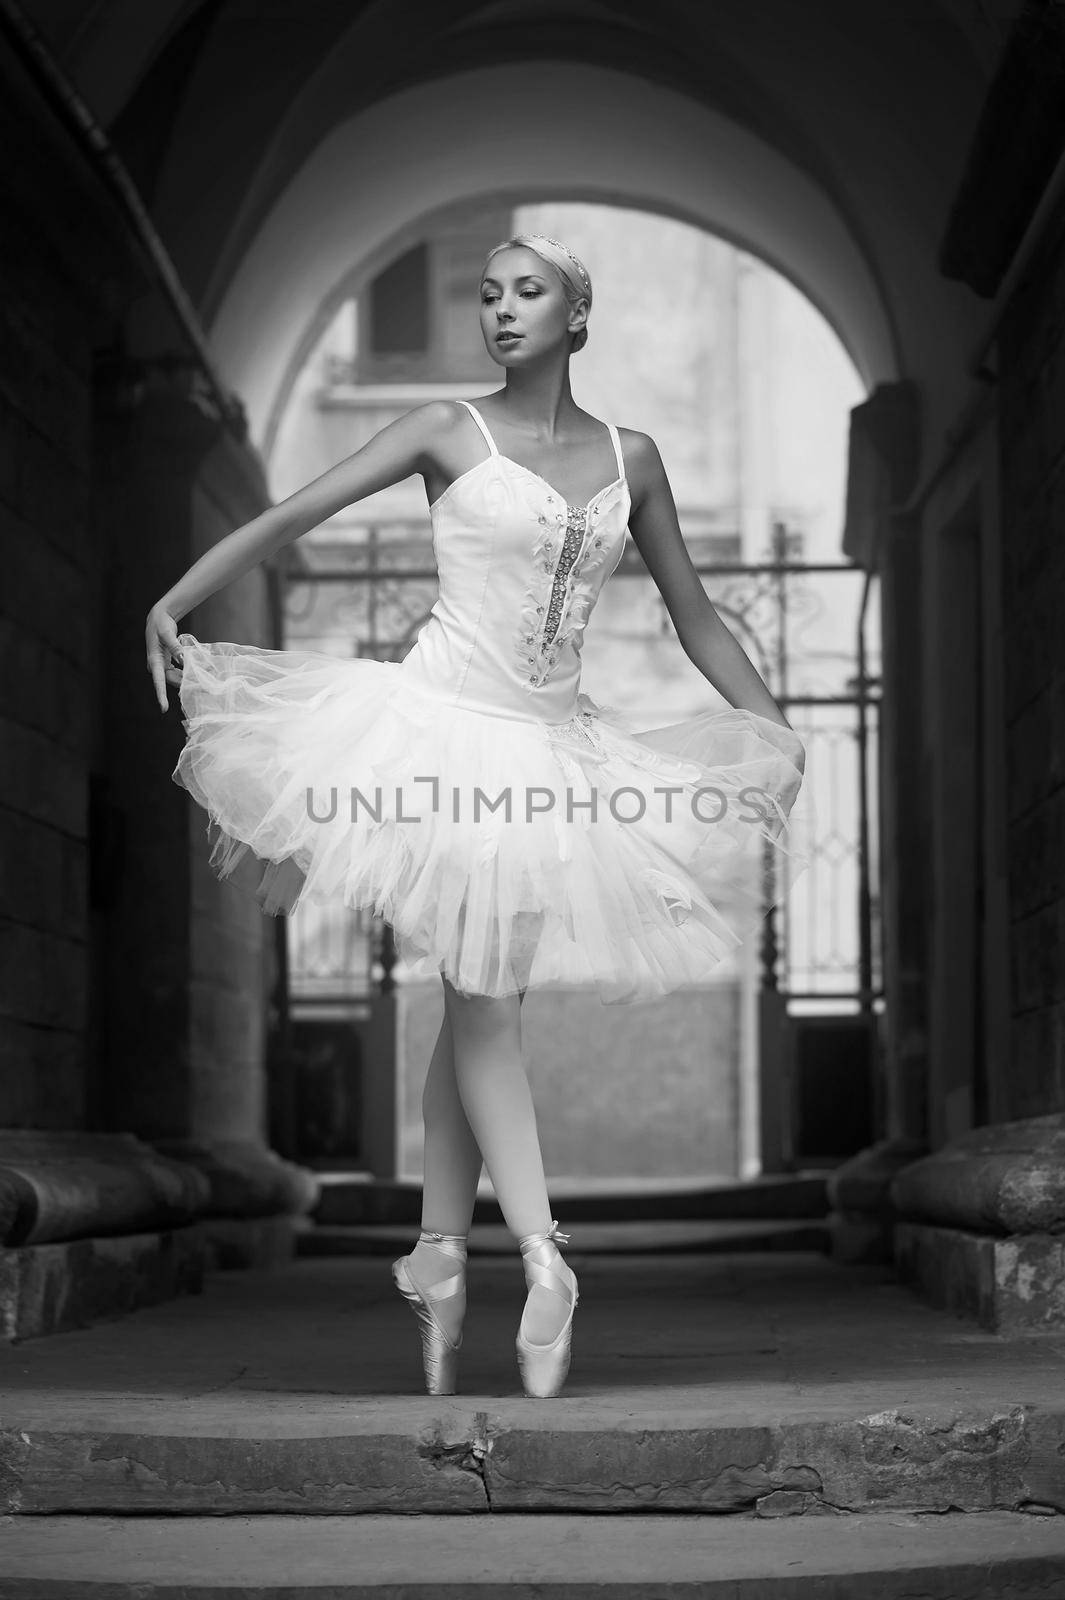 Ready for the big stage. Monochrome soft focus portrait of a young gorgeous ballerina performing her dance outdoors